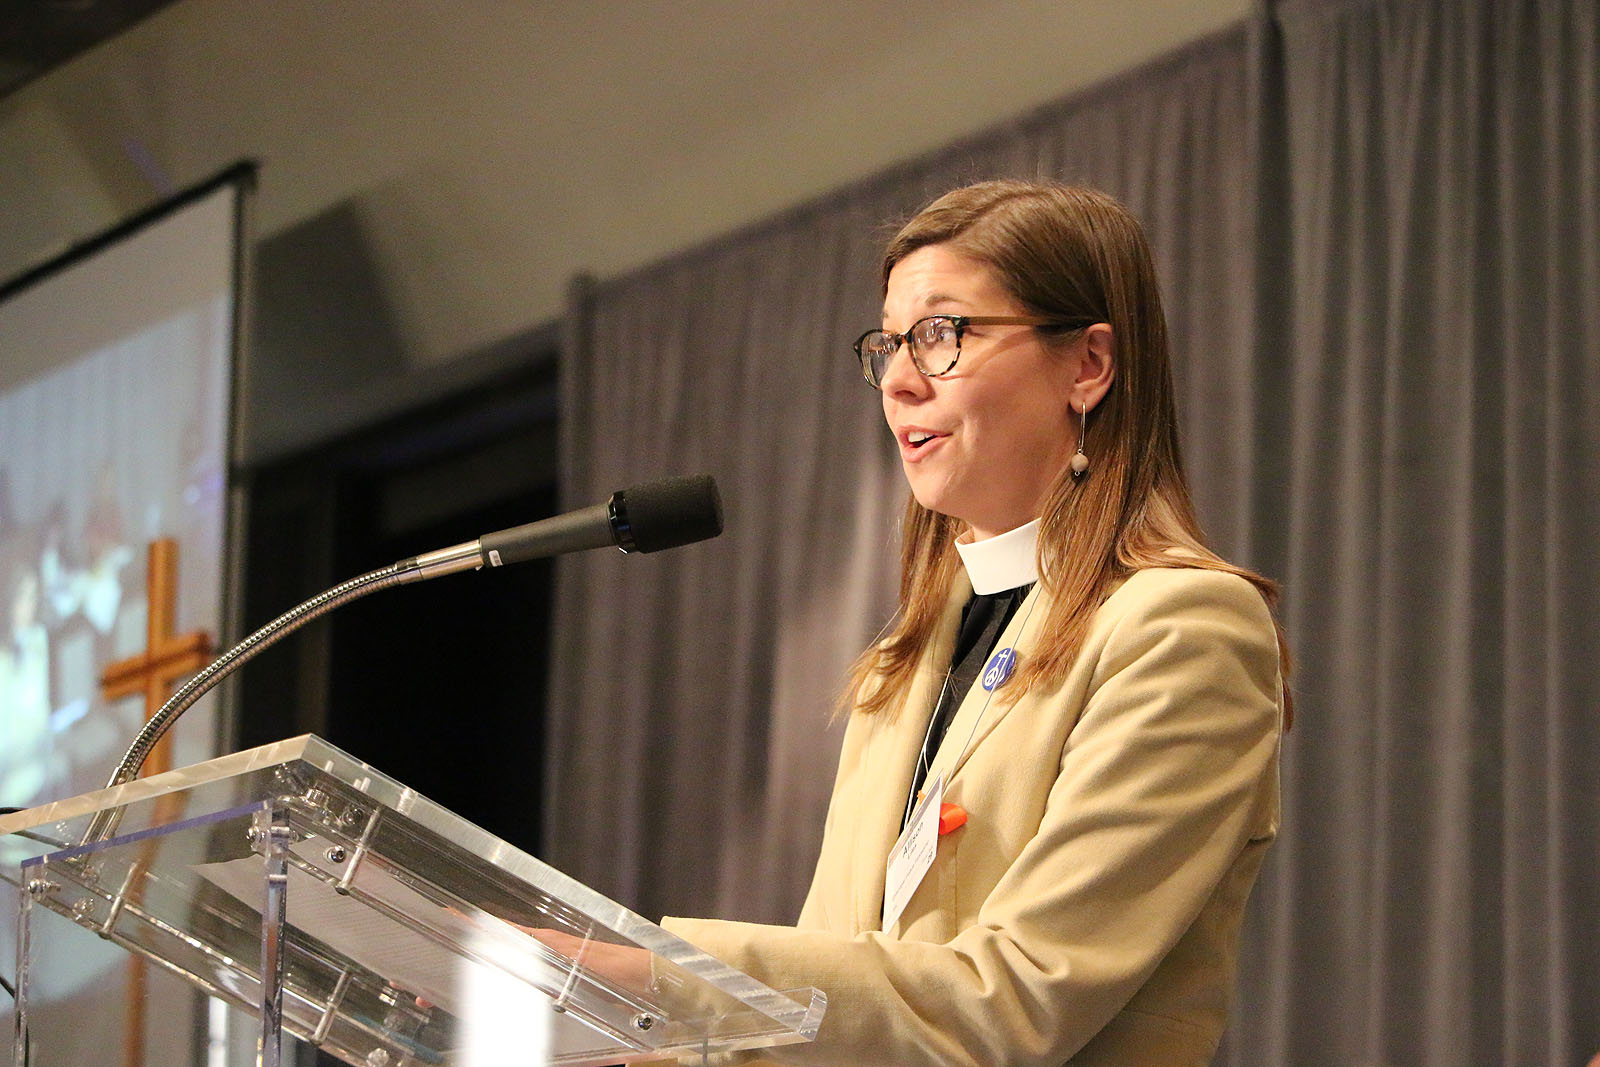 The Rev. Allison Liles, Executive Director of Episcopal Peace Fellowship, speaking at Convention. NINA NICHOLSON PHOTO